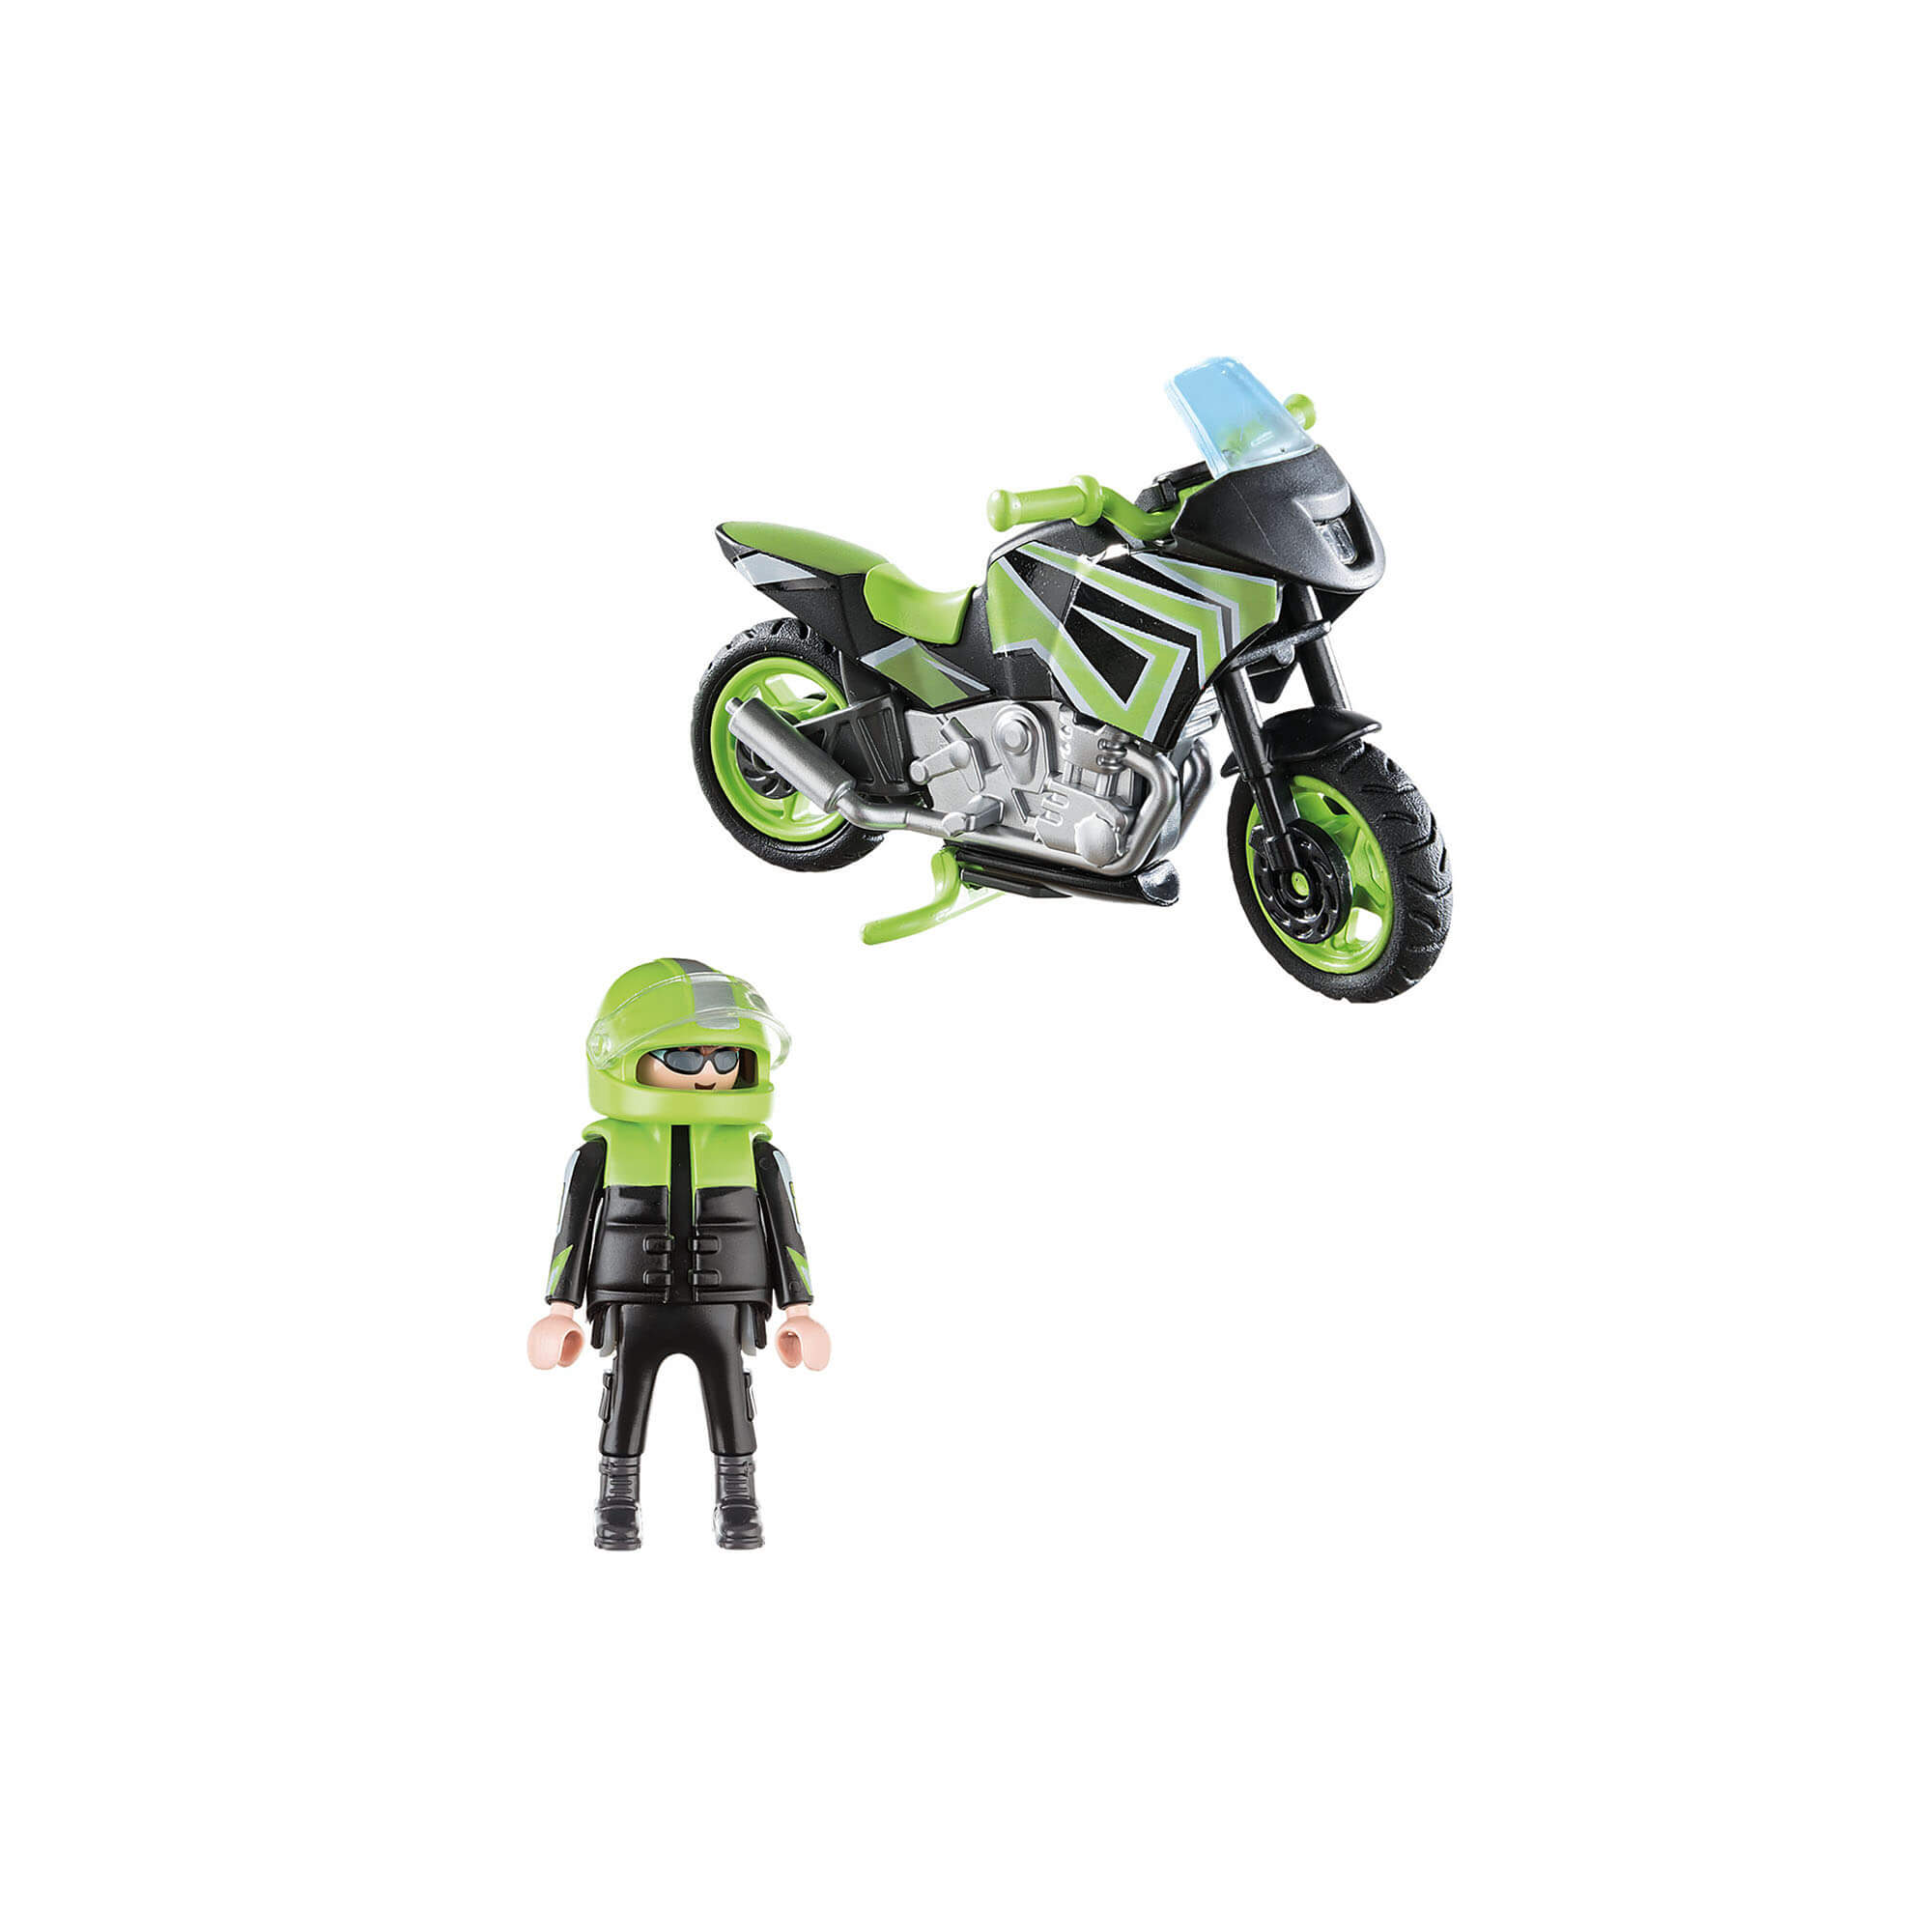 PLAYMOBIL Vehicle World Motorcycle with Rider (70204)